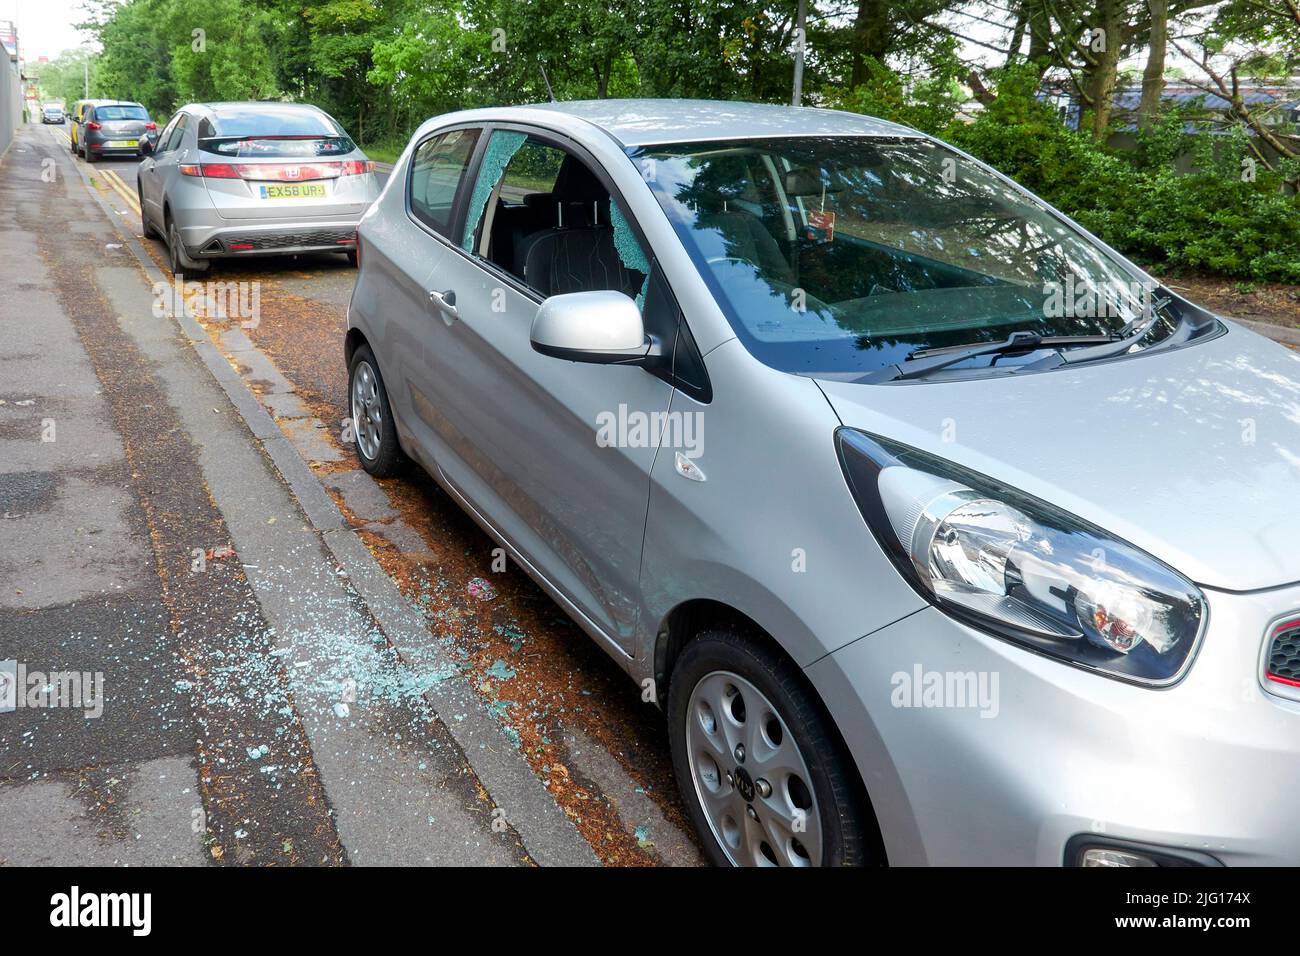 Car broken into by smashing the drivers side door window Stock Photo